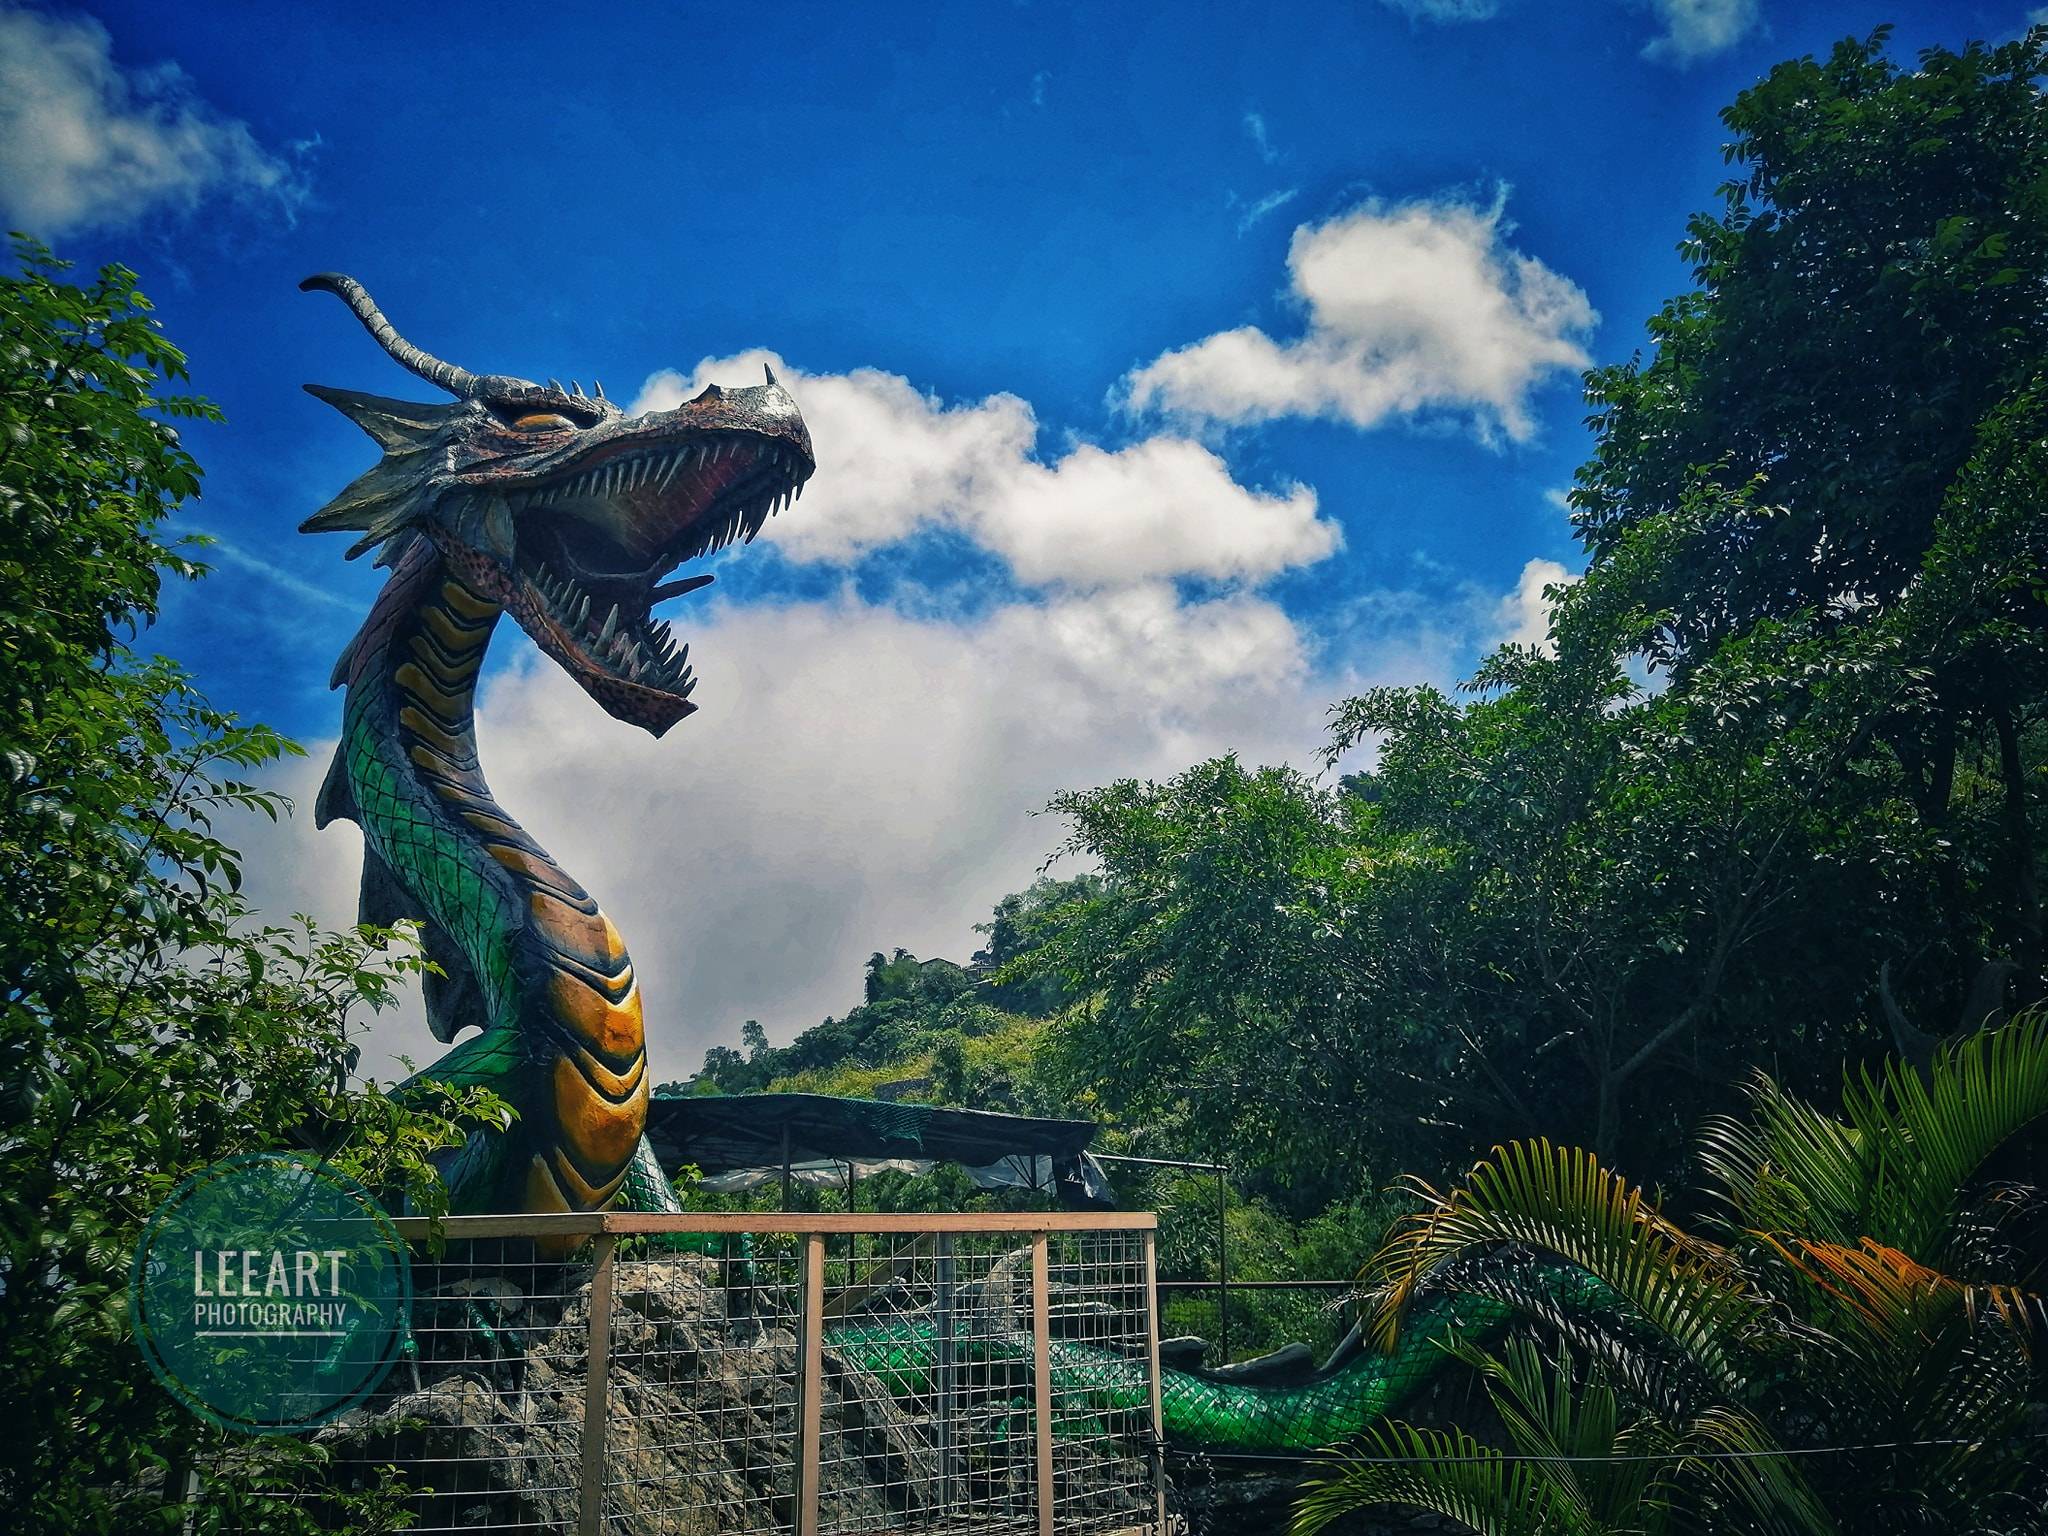 Travel to Baguio to see the many faces at Sam's Rock Garden